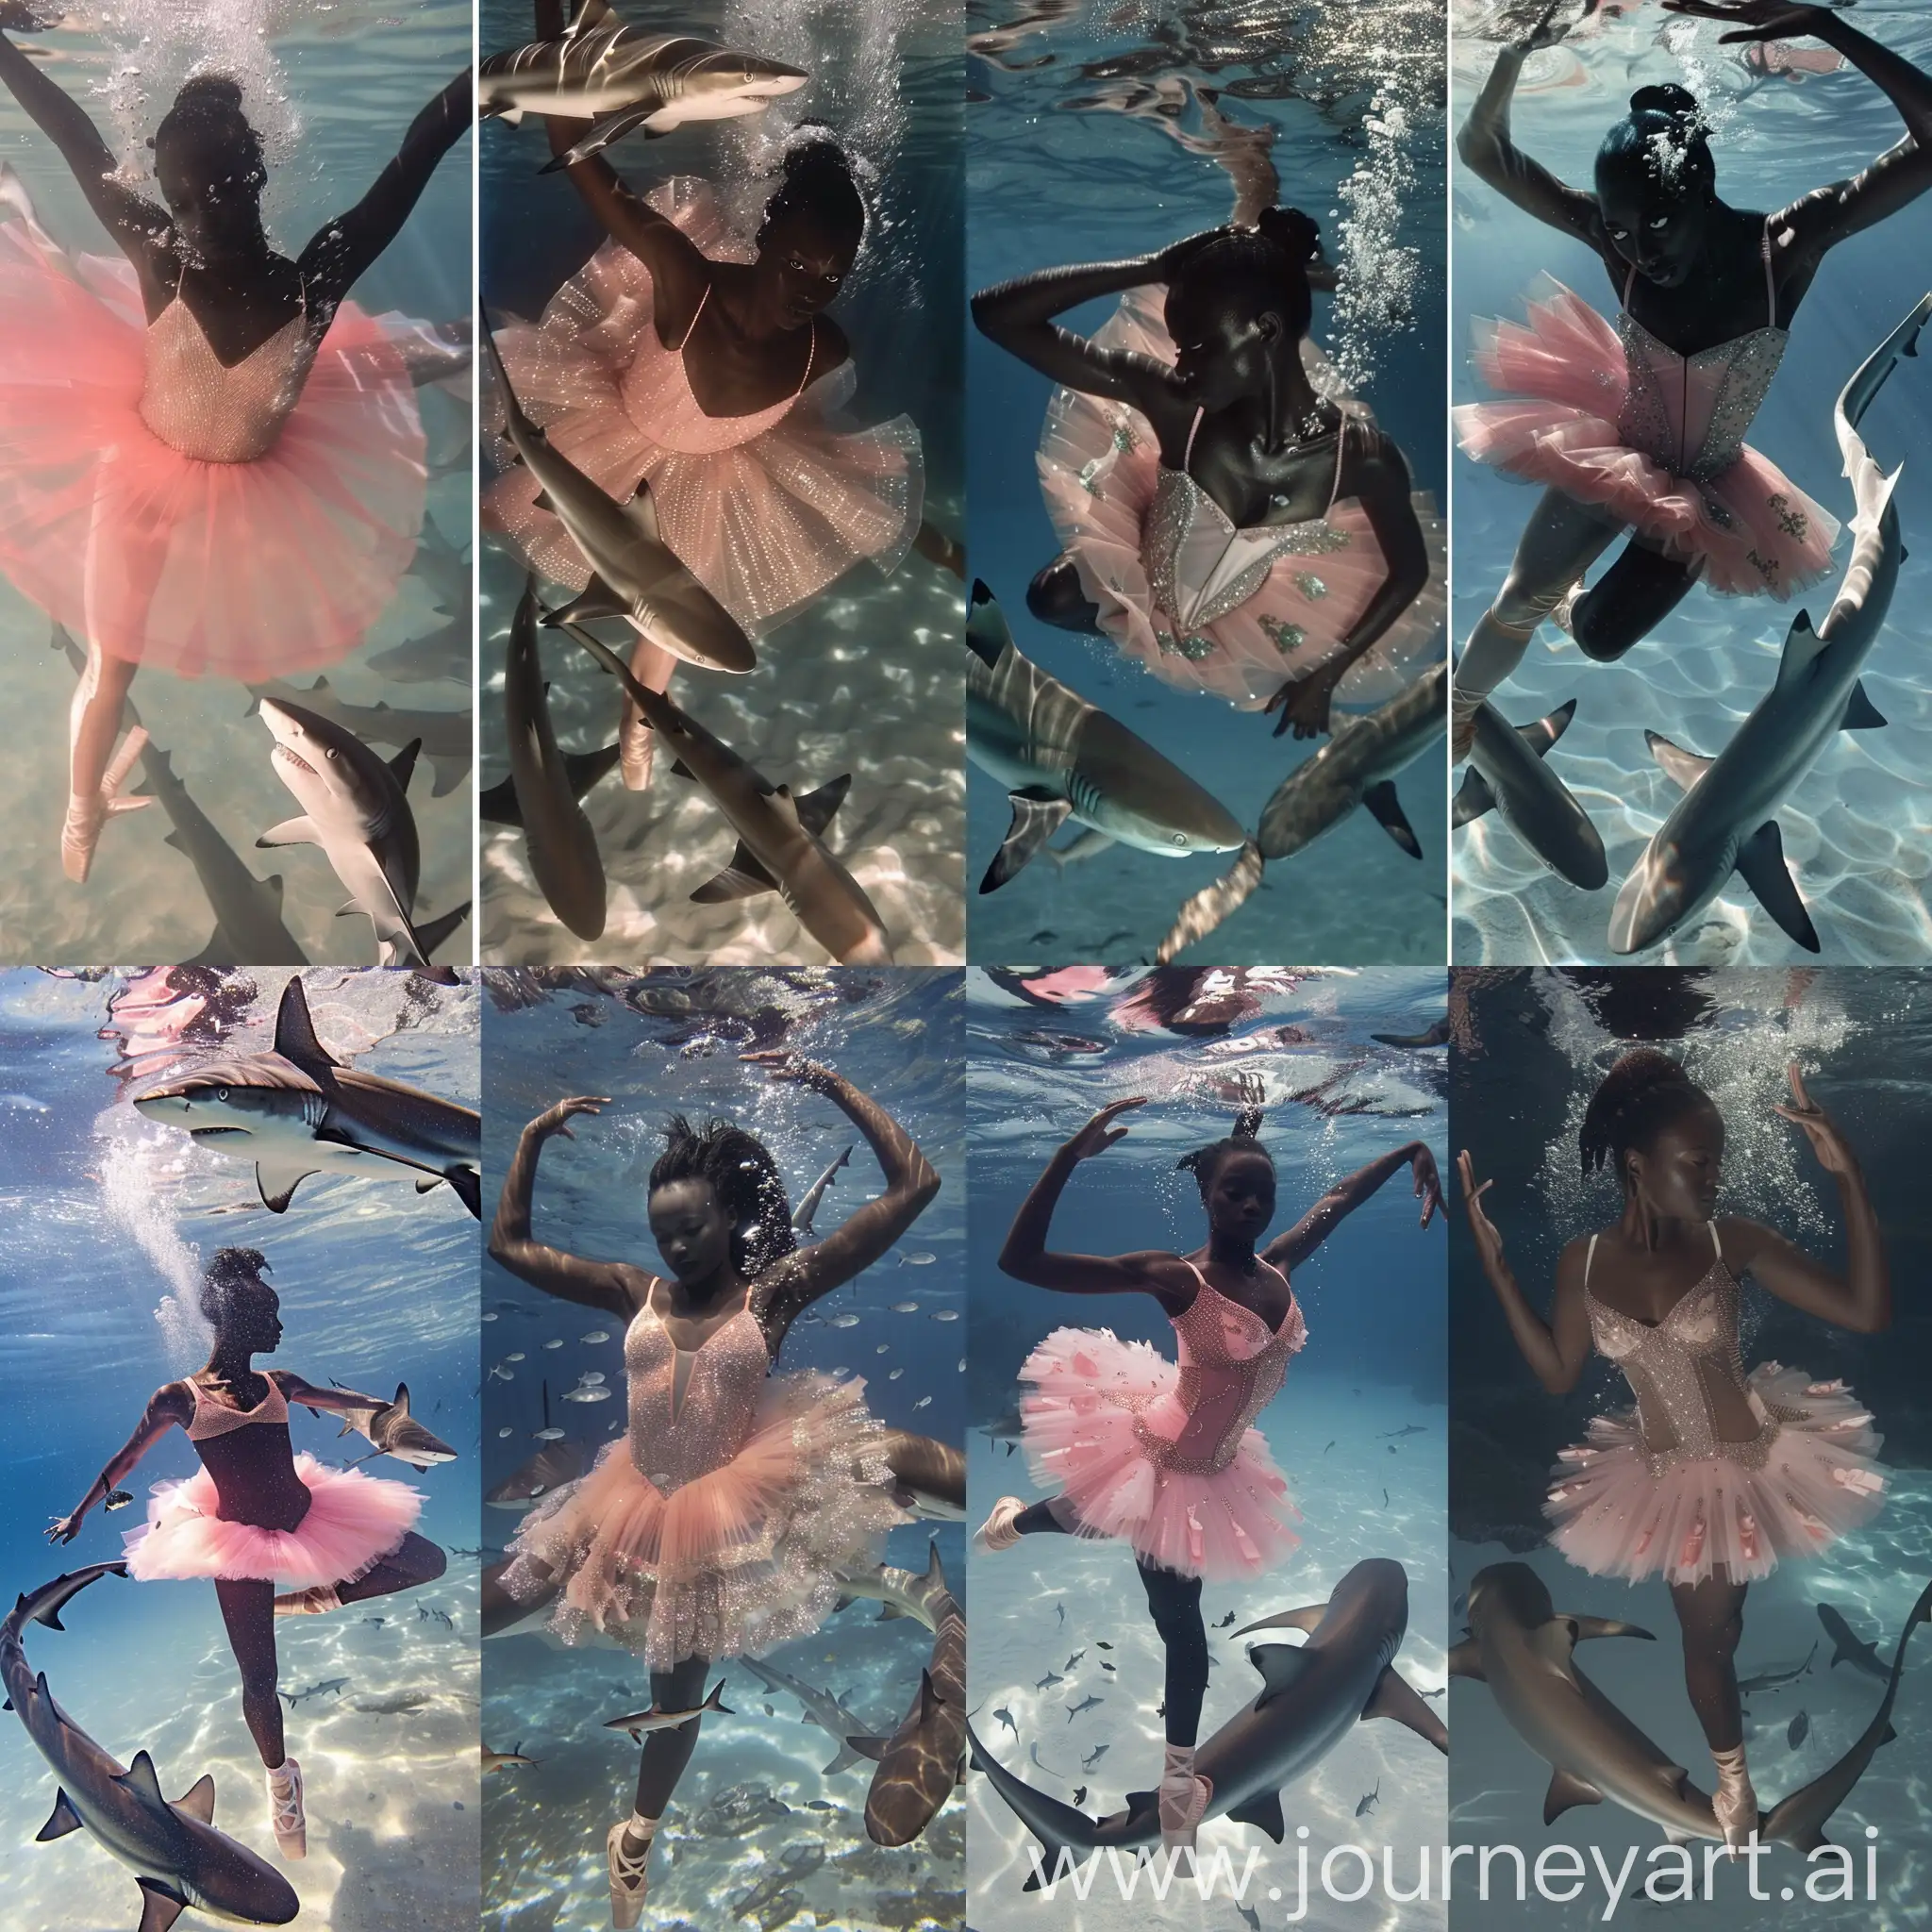 two captivating images: one image is a black ballet dancer underwater with three sharks around her, and the other image is a black ballet dancer in a pink ballet dress underwater with three sharks around her.